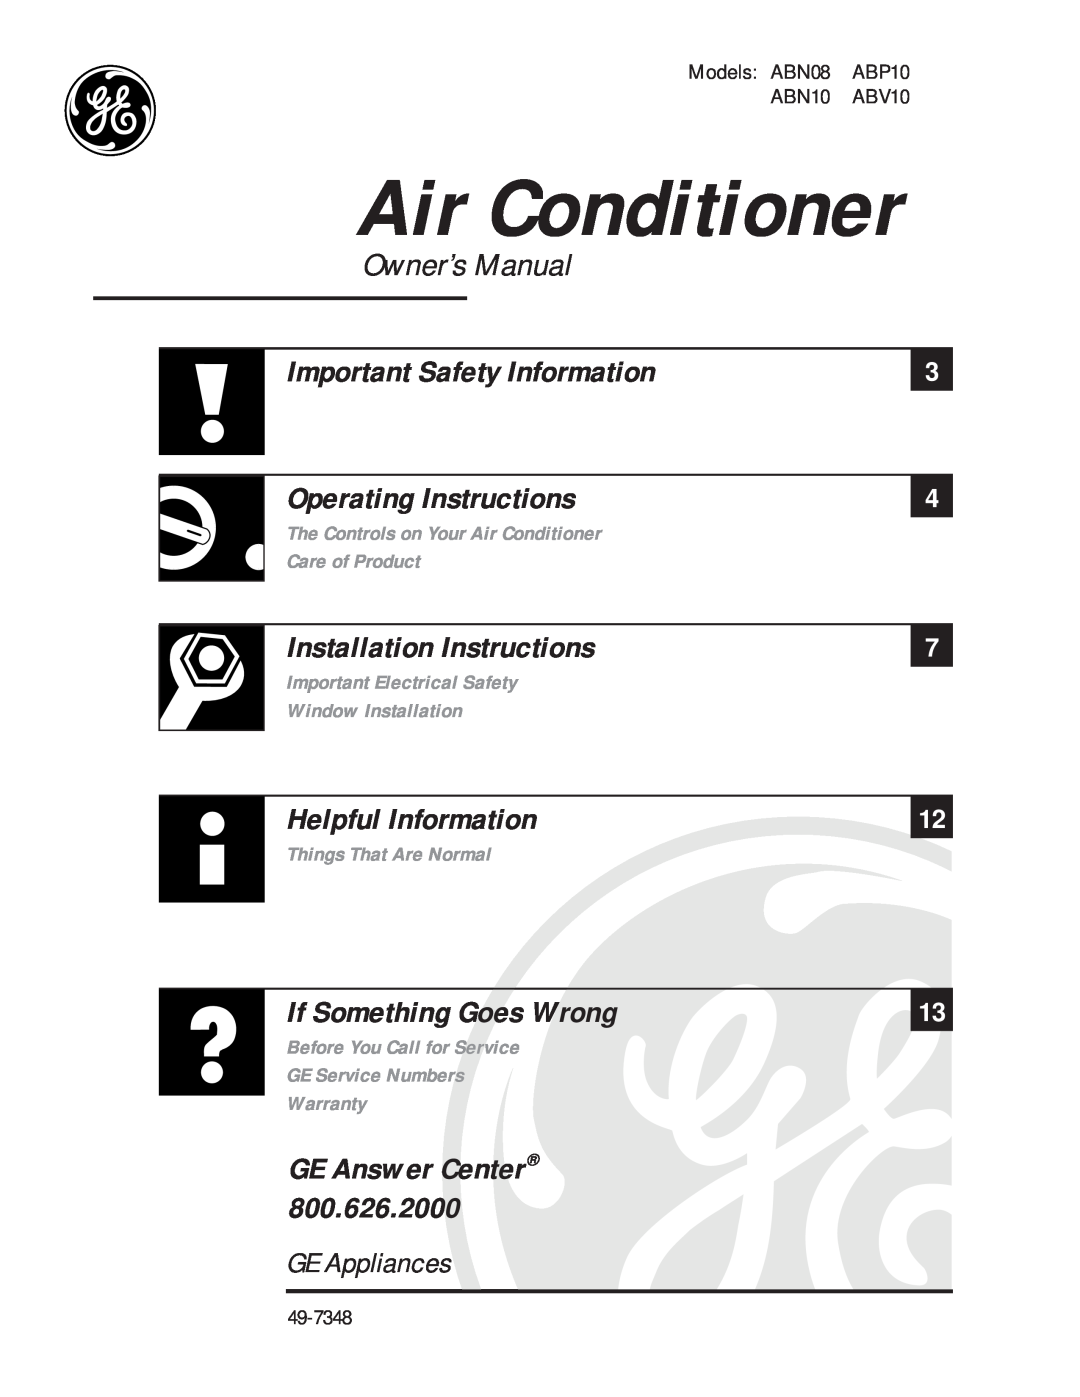 GE ABN10 installation instructions GE Answer Center, Air Conditioner, Important Safety Information, Operating Instructions 